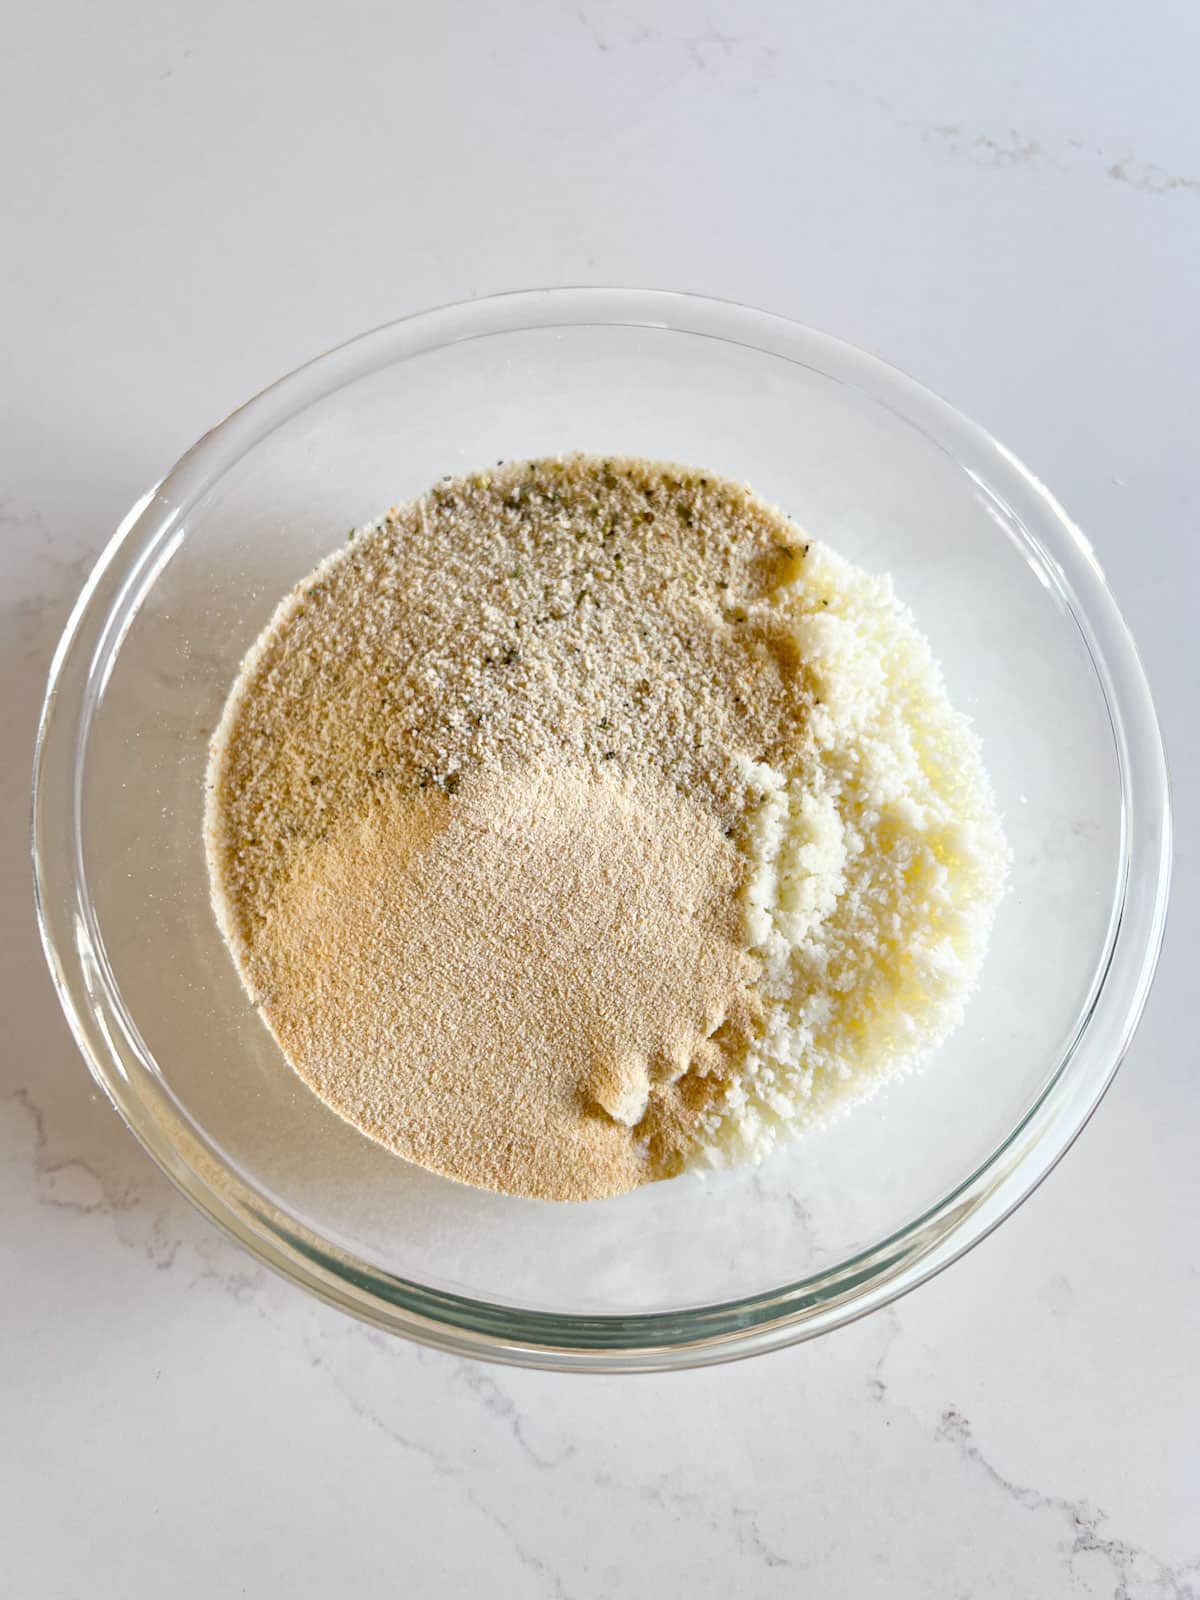 Dry ingredients placed in a glass bowl.